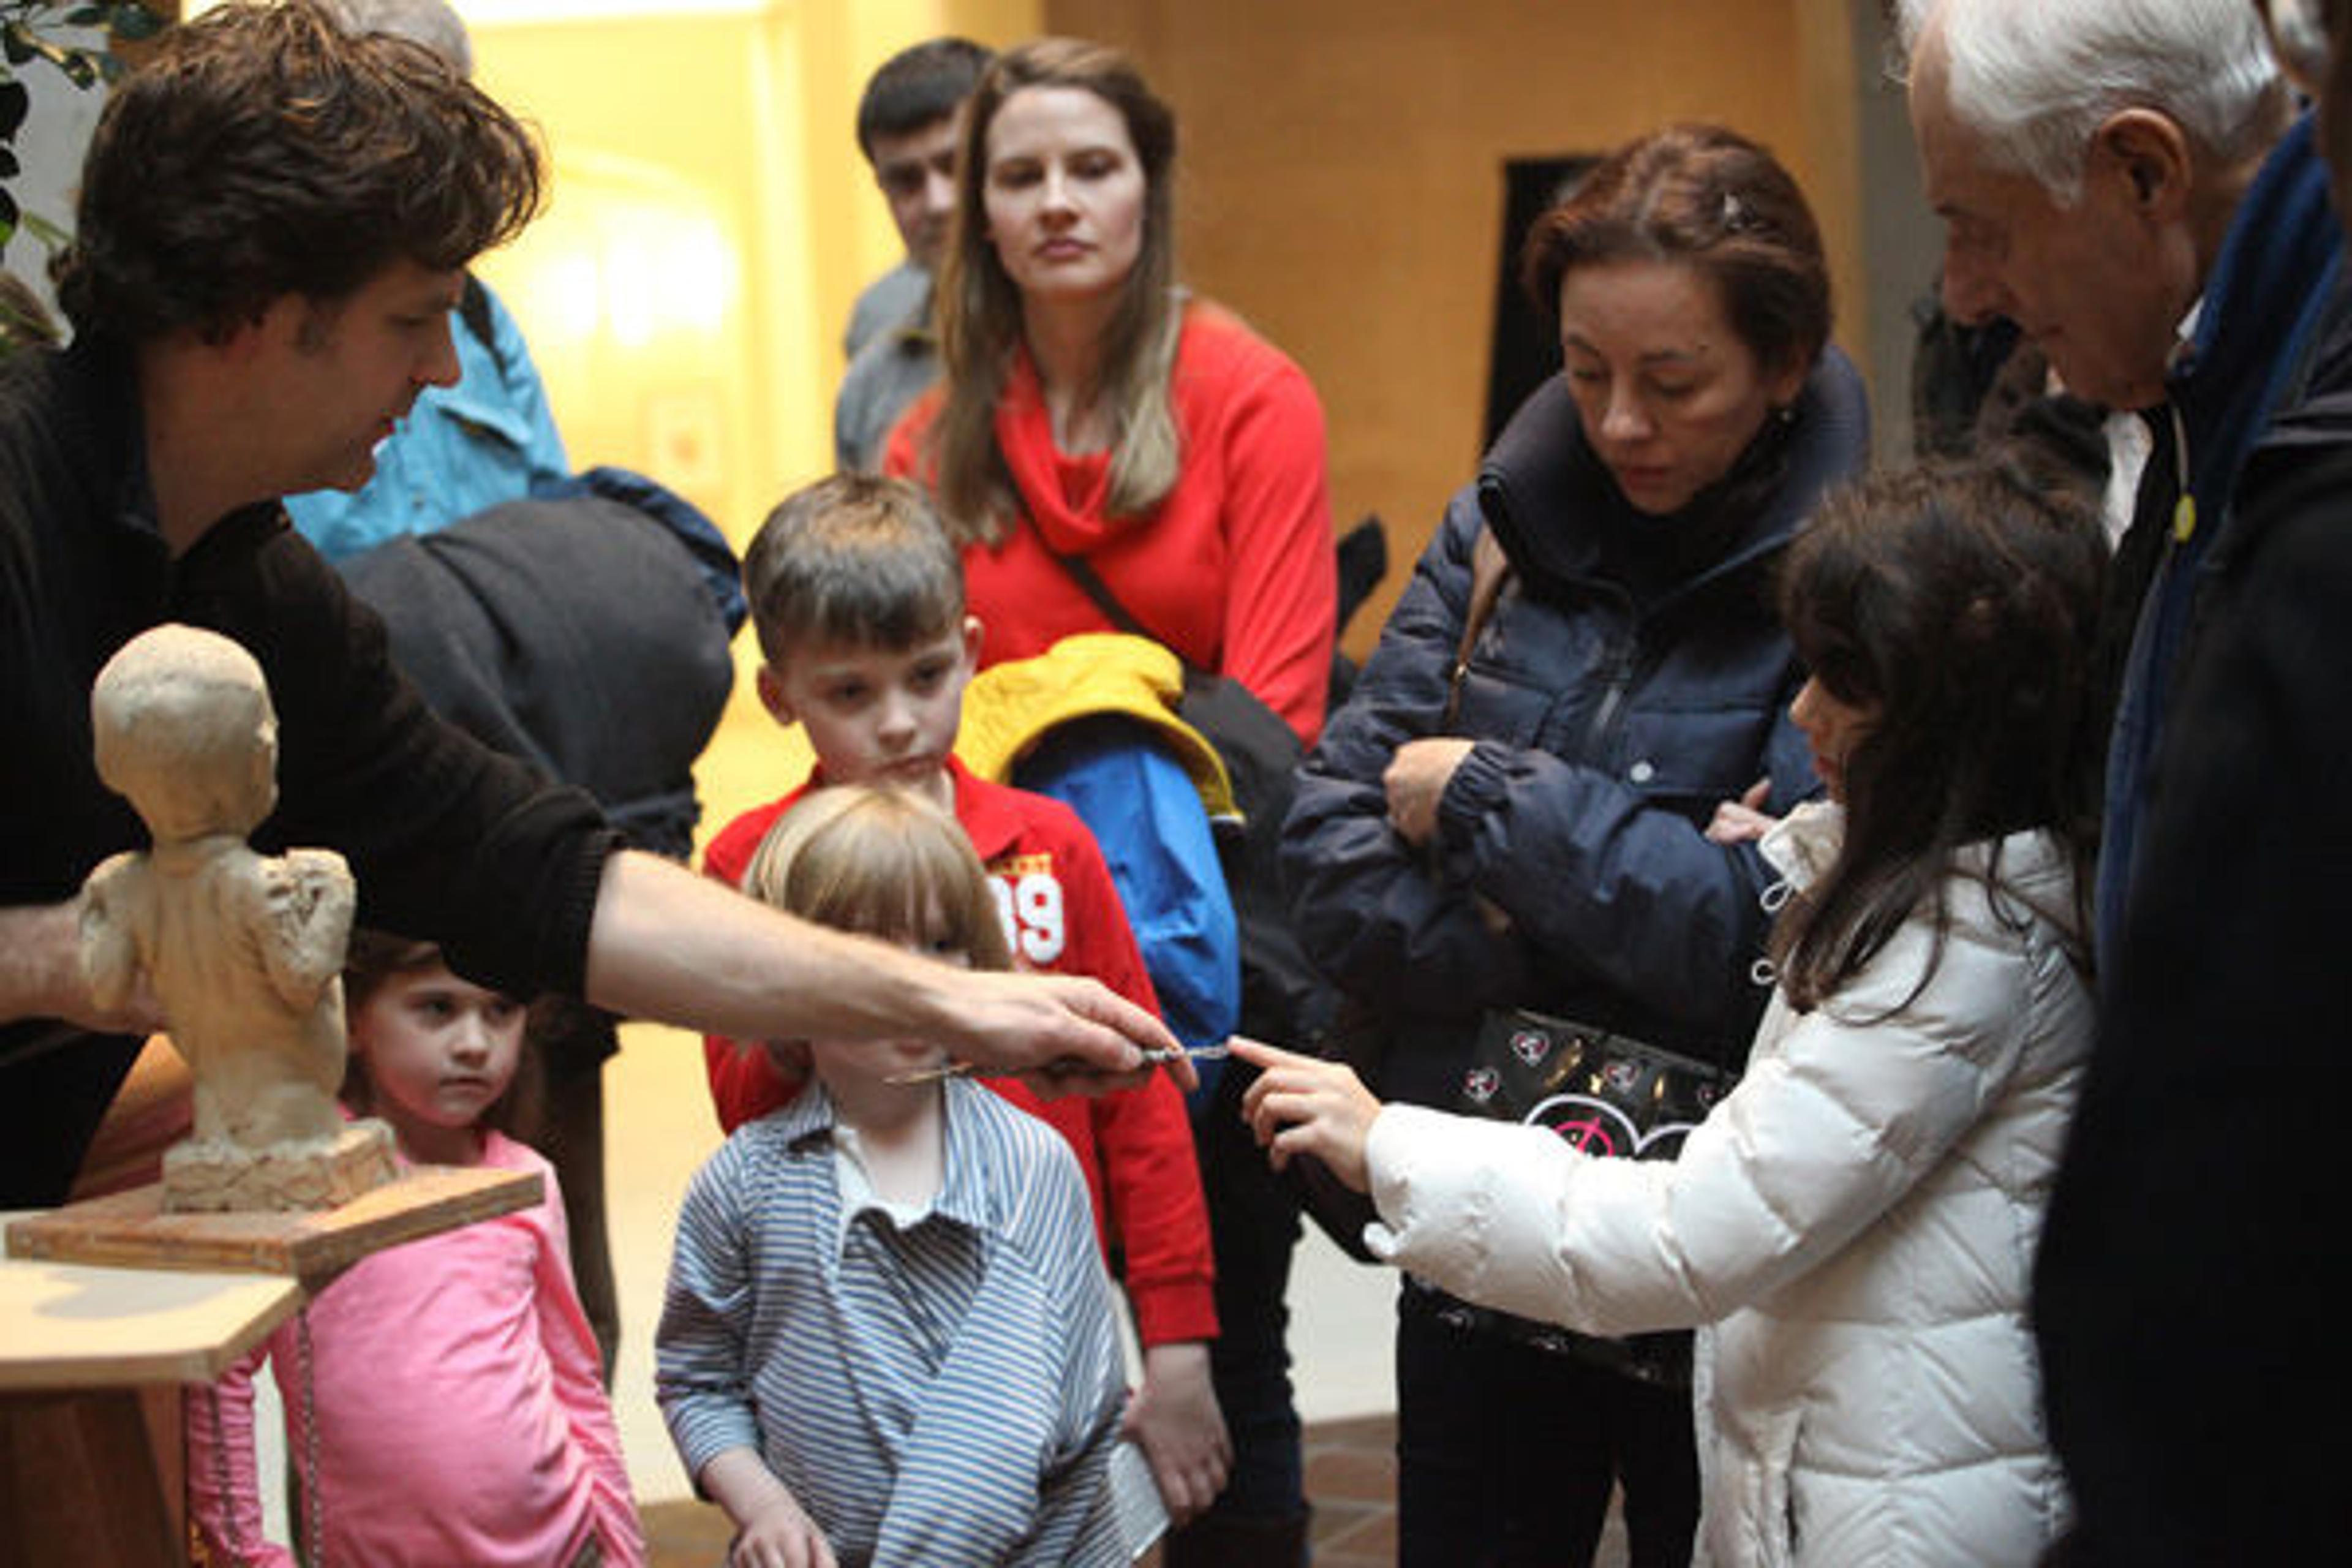 Hesser in the galleries with children and adults